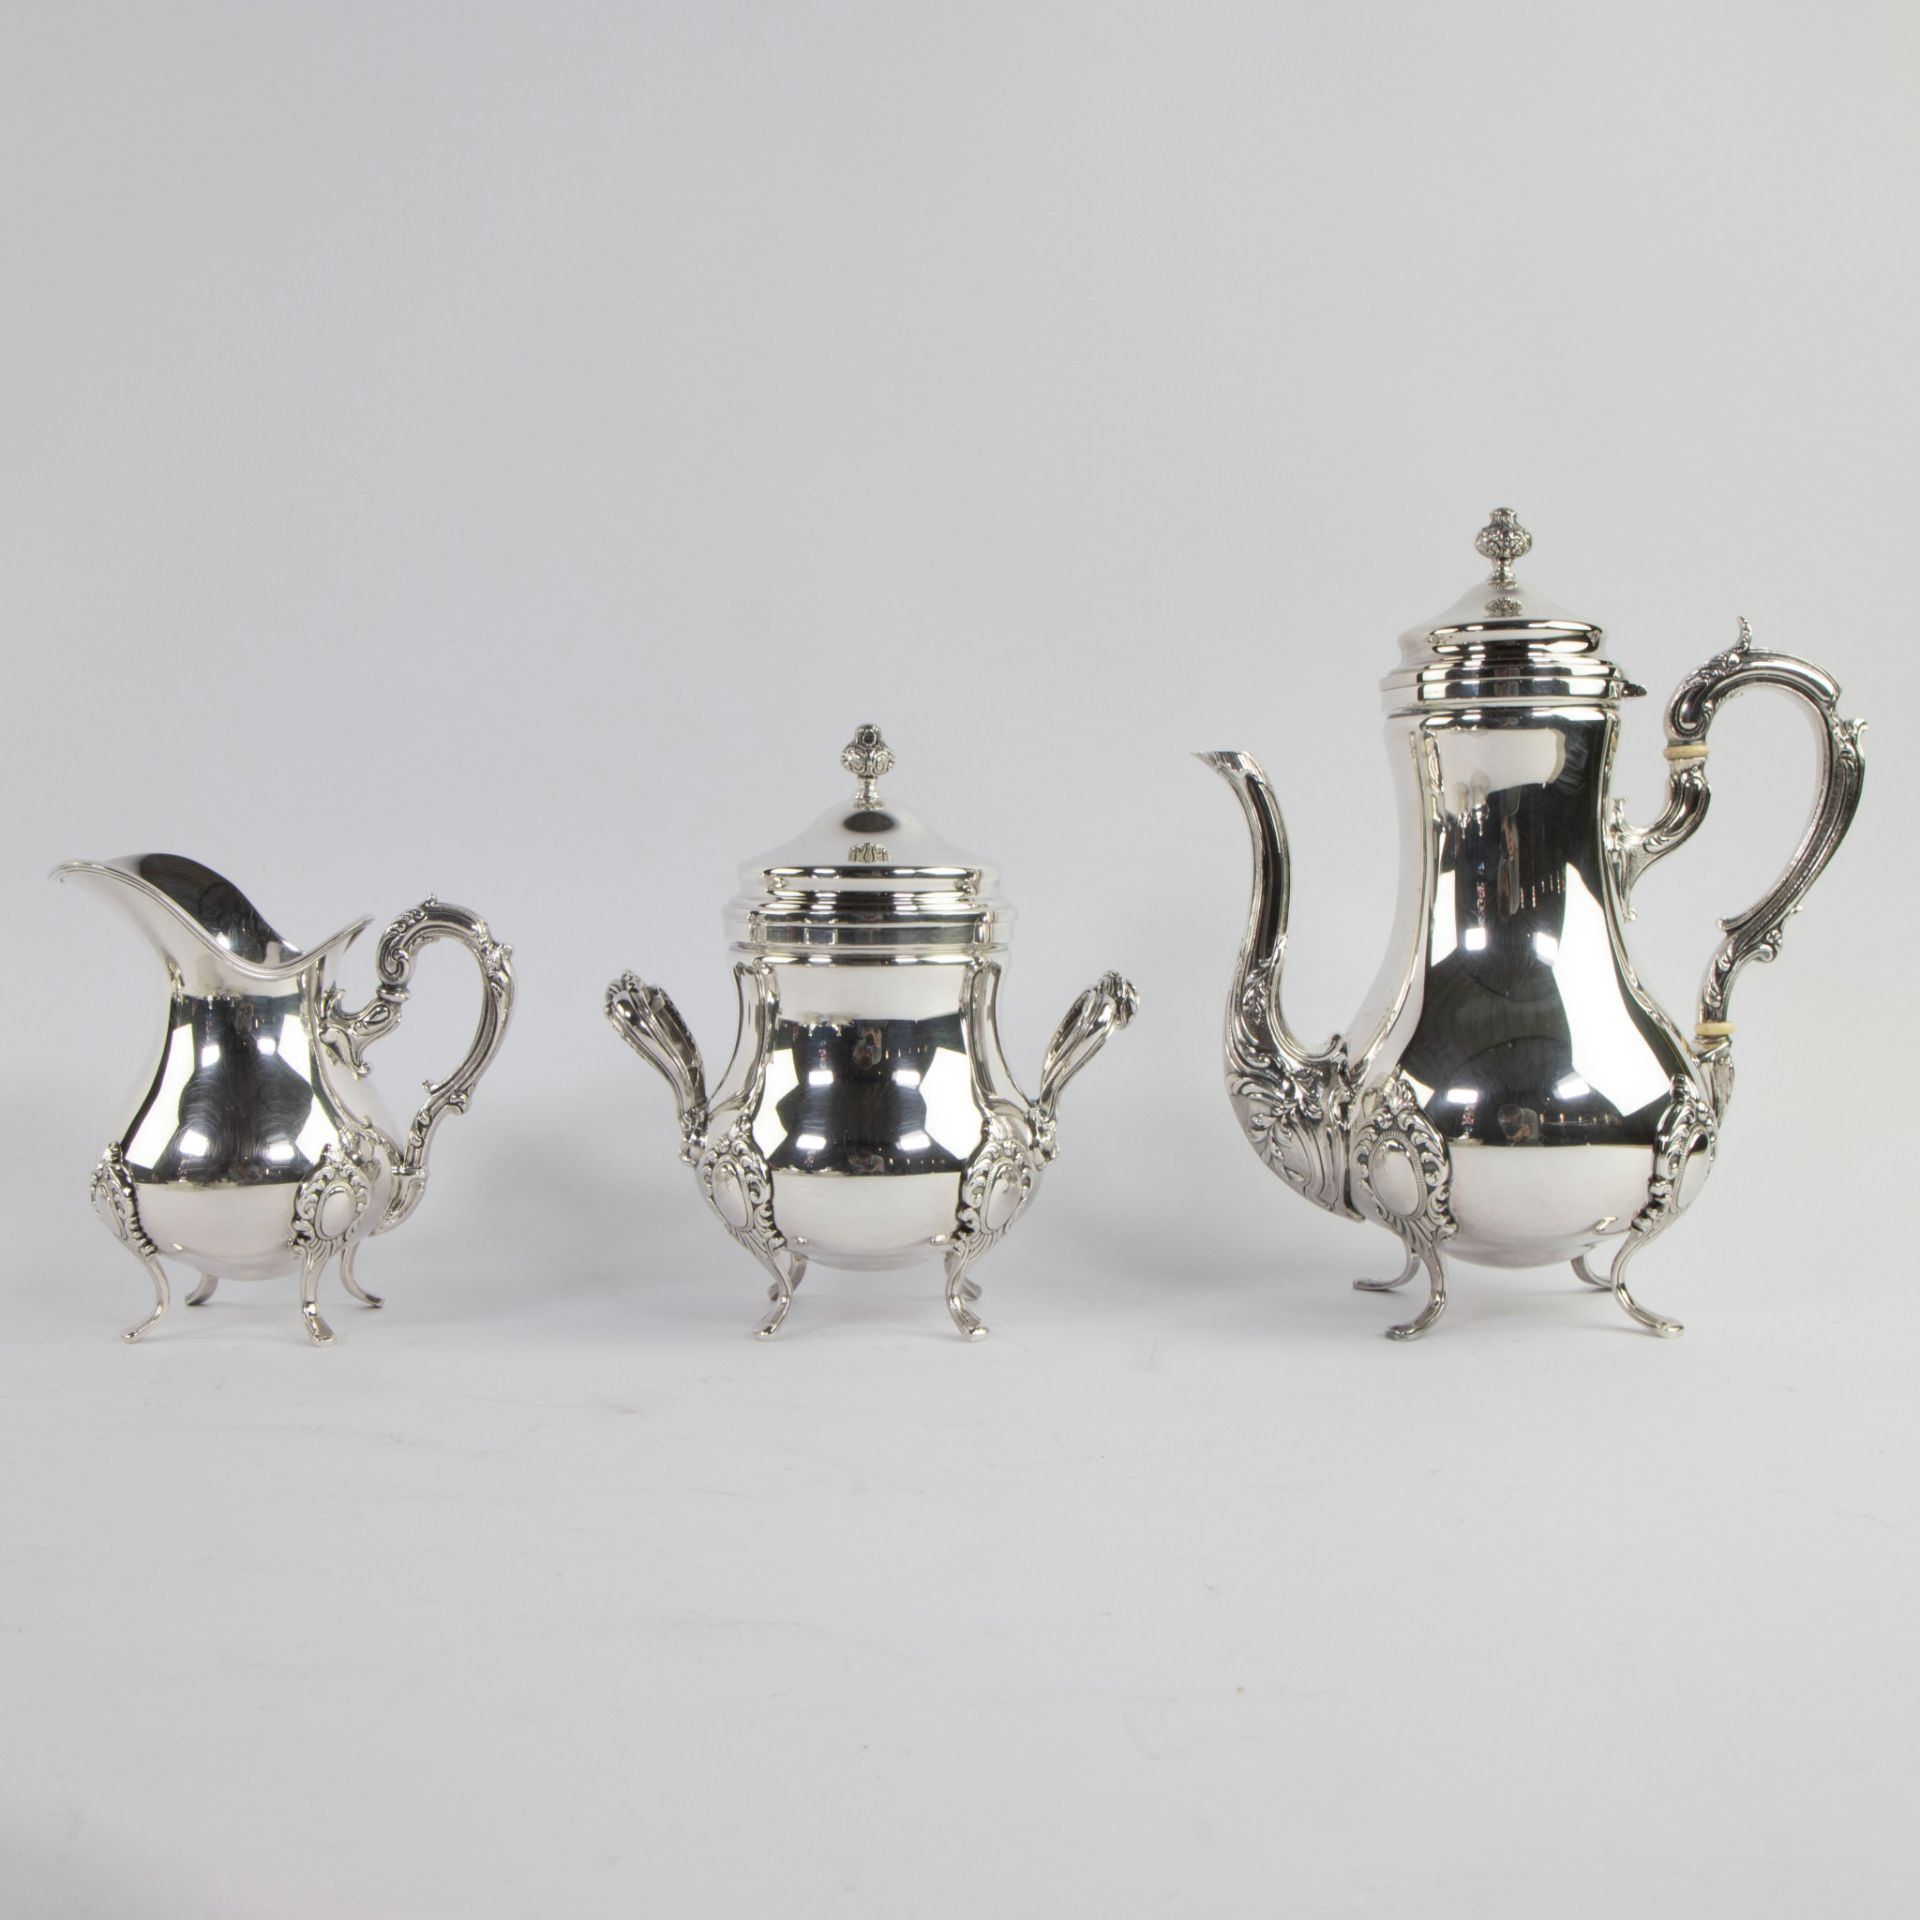 Christofle coffee and tea set, 2 dishes and a silvered sauce bowl - Image 2 of 5